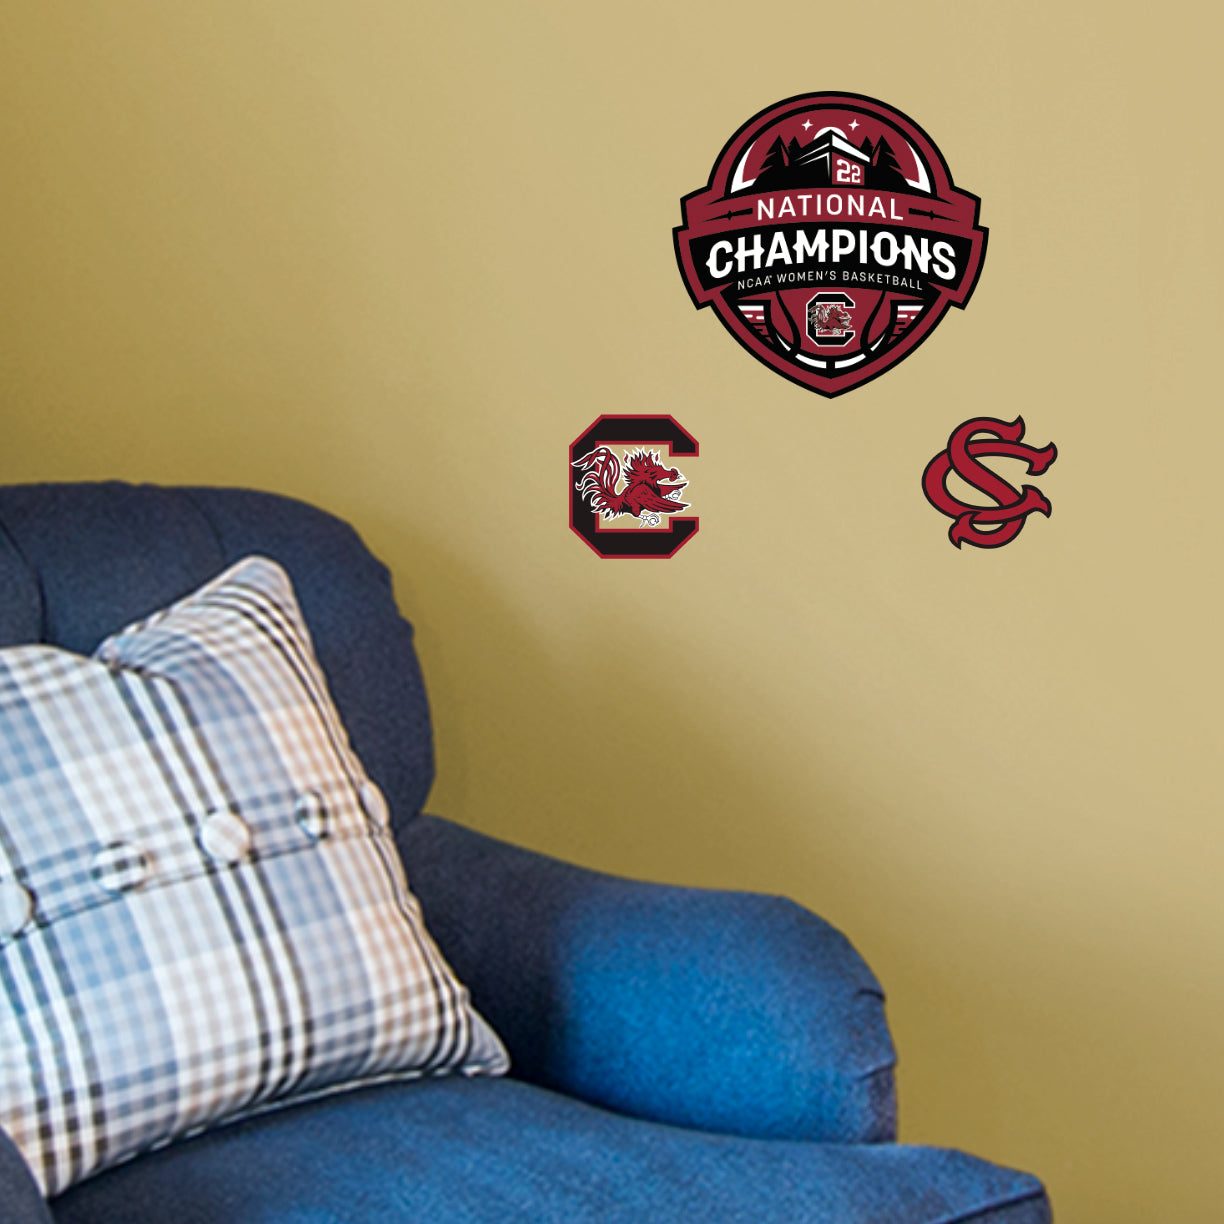 South Carolina Gamecocks: 2022 Women's Basketball Champions Logo - Officially Licensed NCAA Removable Adhesive Decal